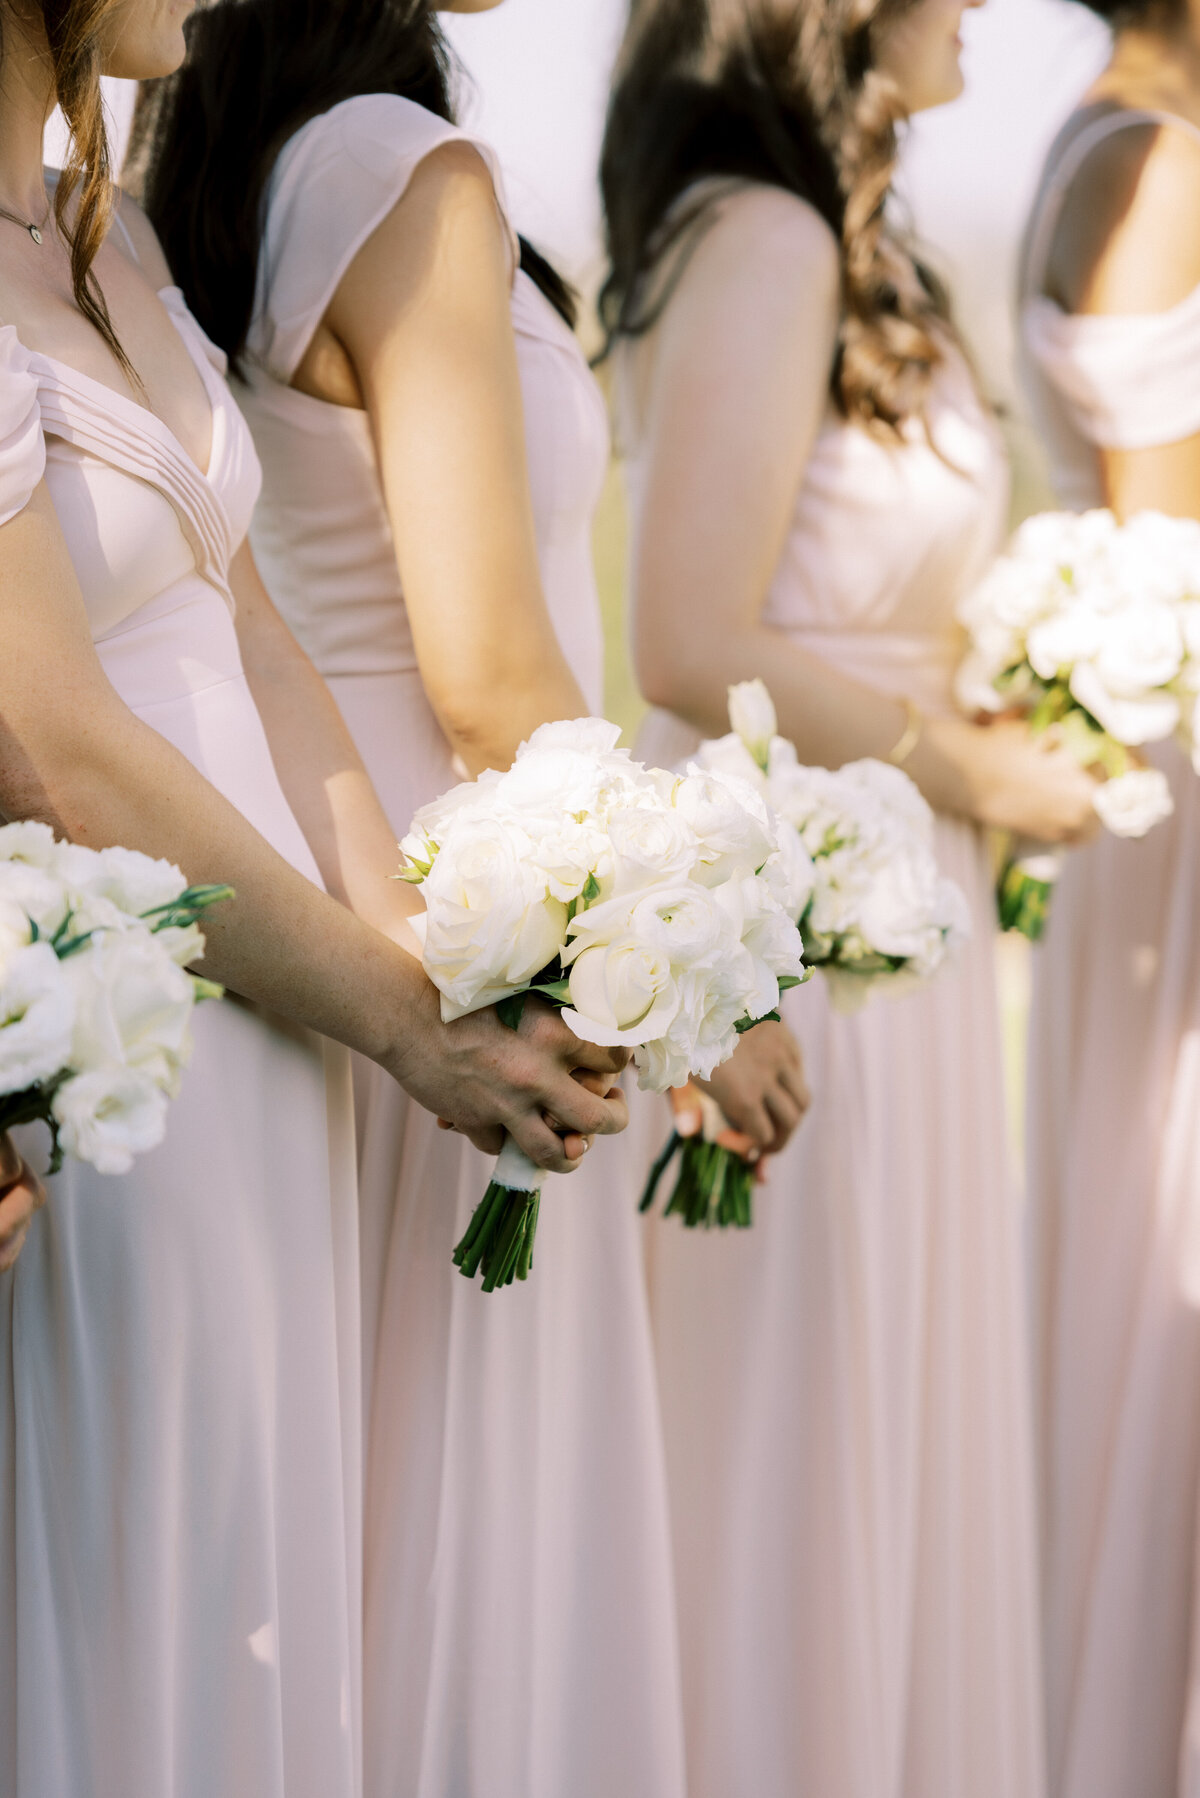 A row of white rose bouquet for the bridesmaids add a special glow of beauty.